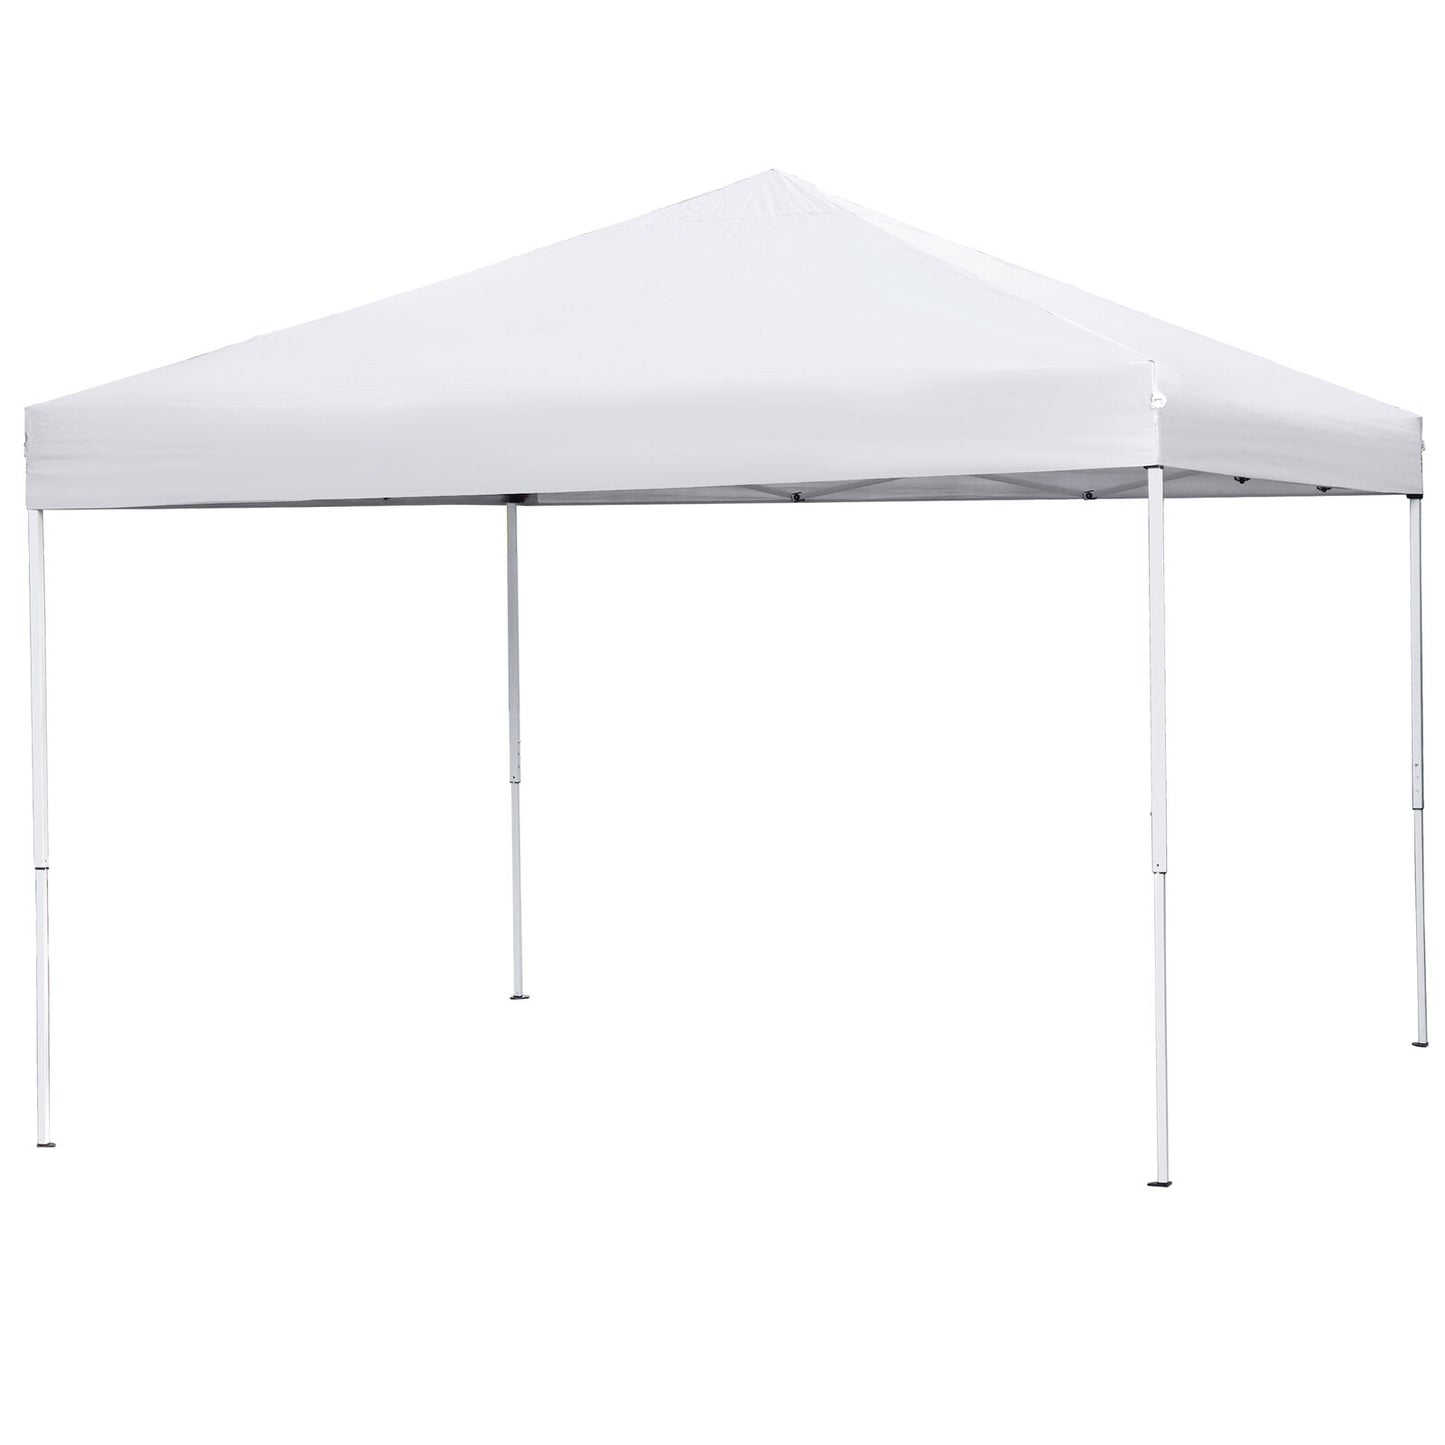 10 x 10 ft Pop Up Foldable Canopy Tent PreAssembled Lightweight Waterproof White